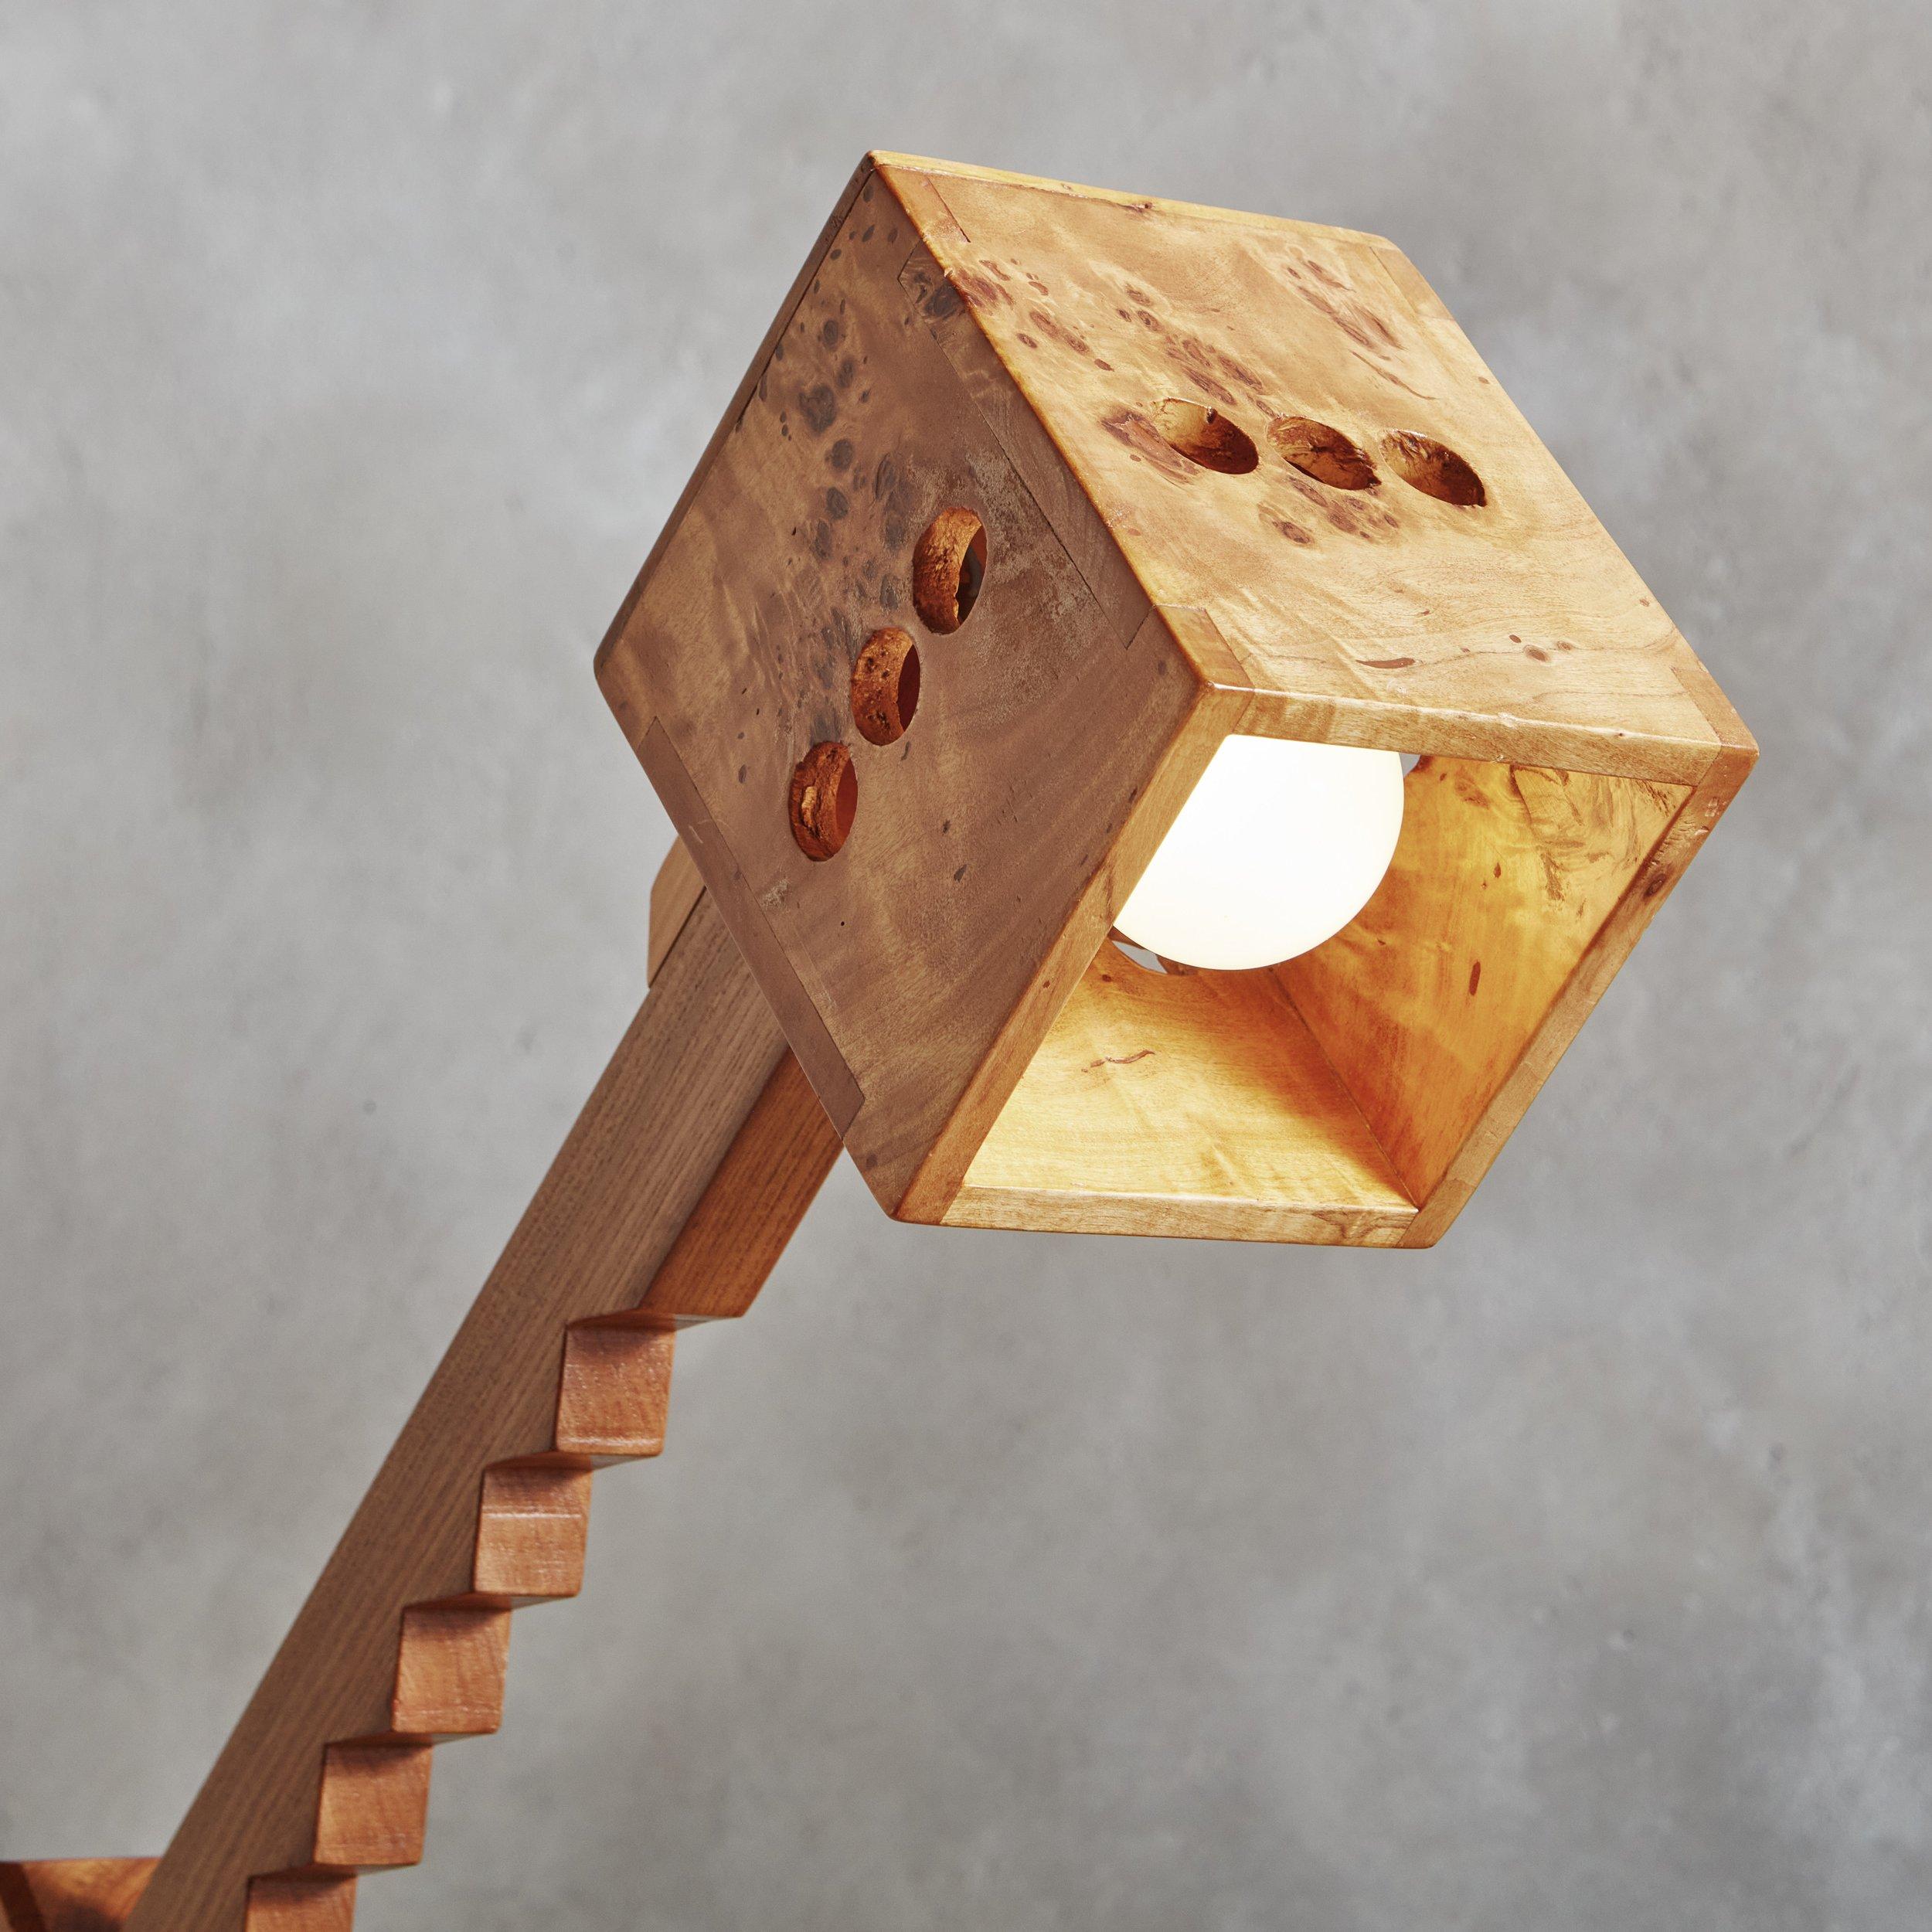 Pinocchio Adjustable Floor Lamp in Pine by Pietro Cascella for Reflo, Italy 1972
 

DIMENSIONS: 40